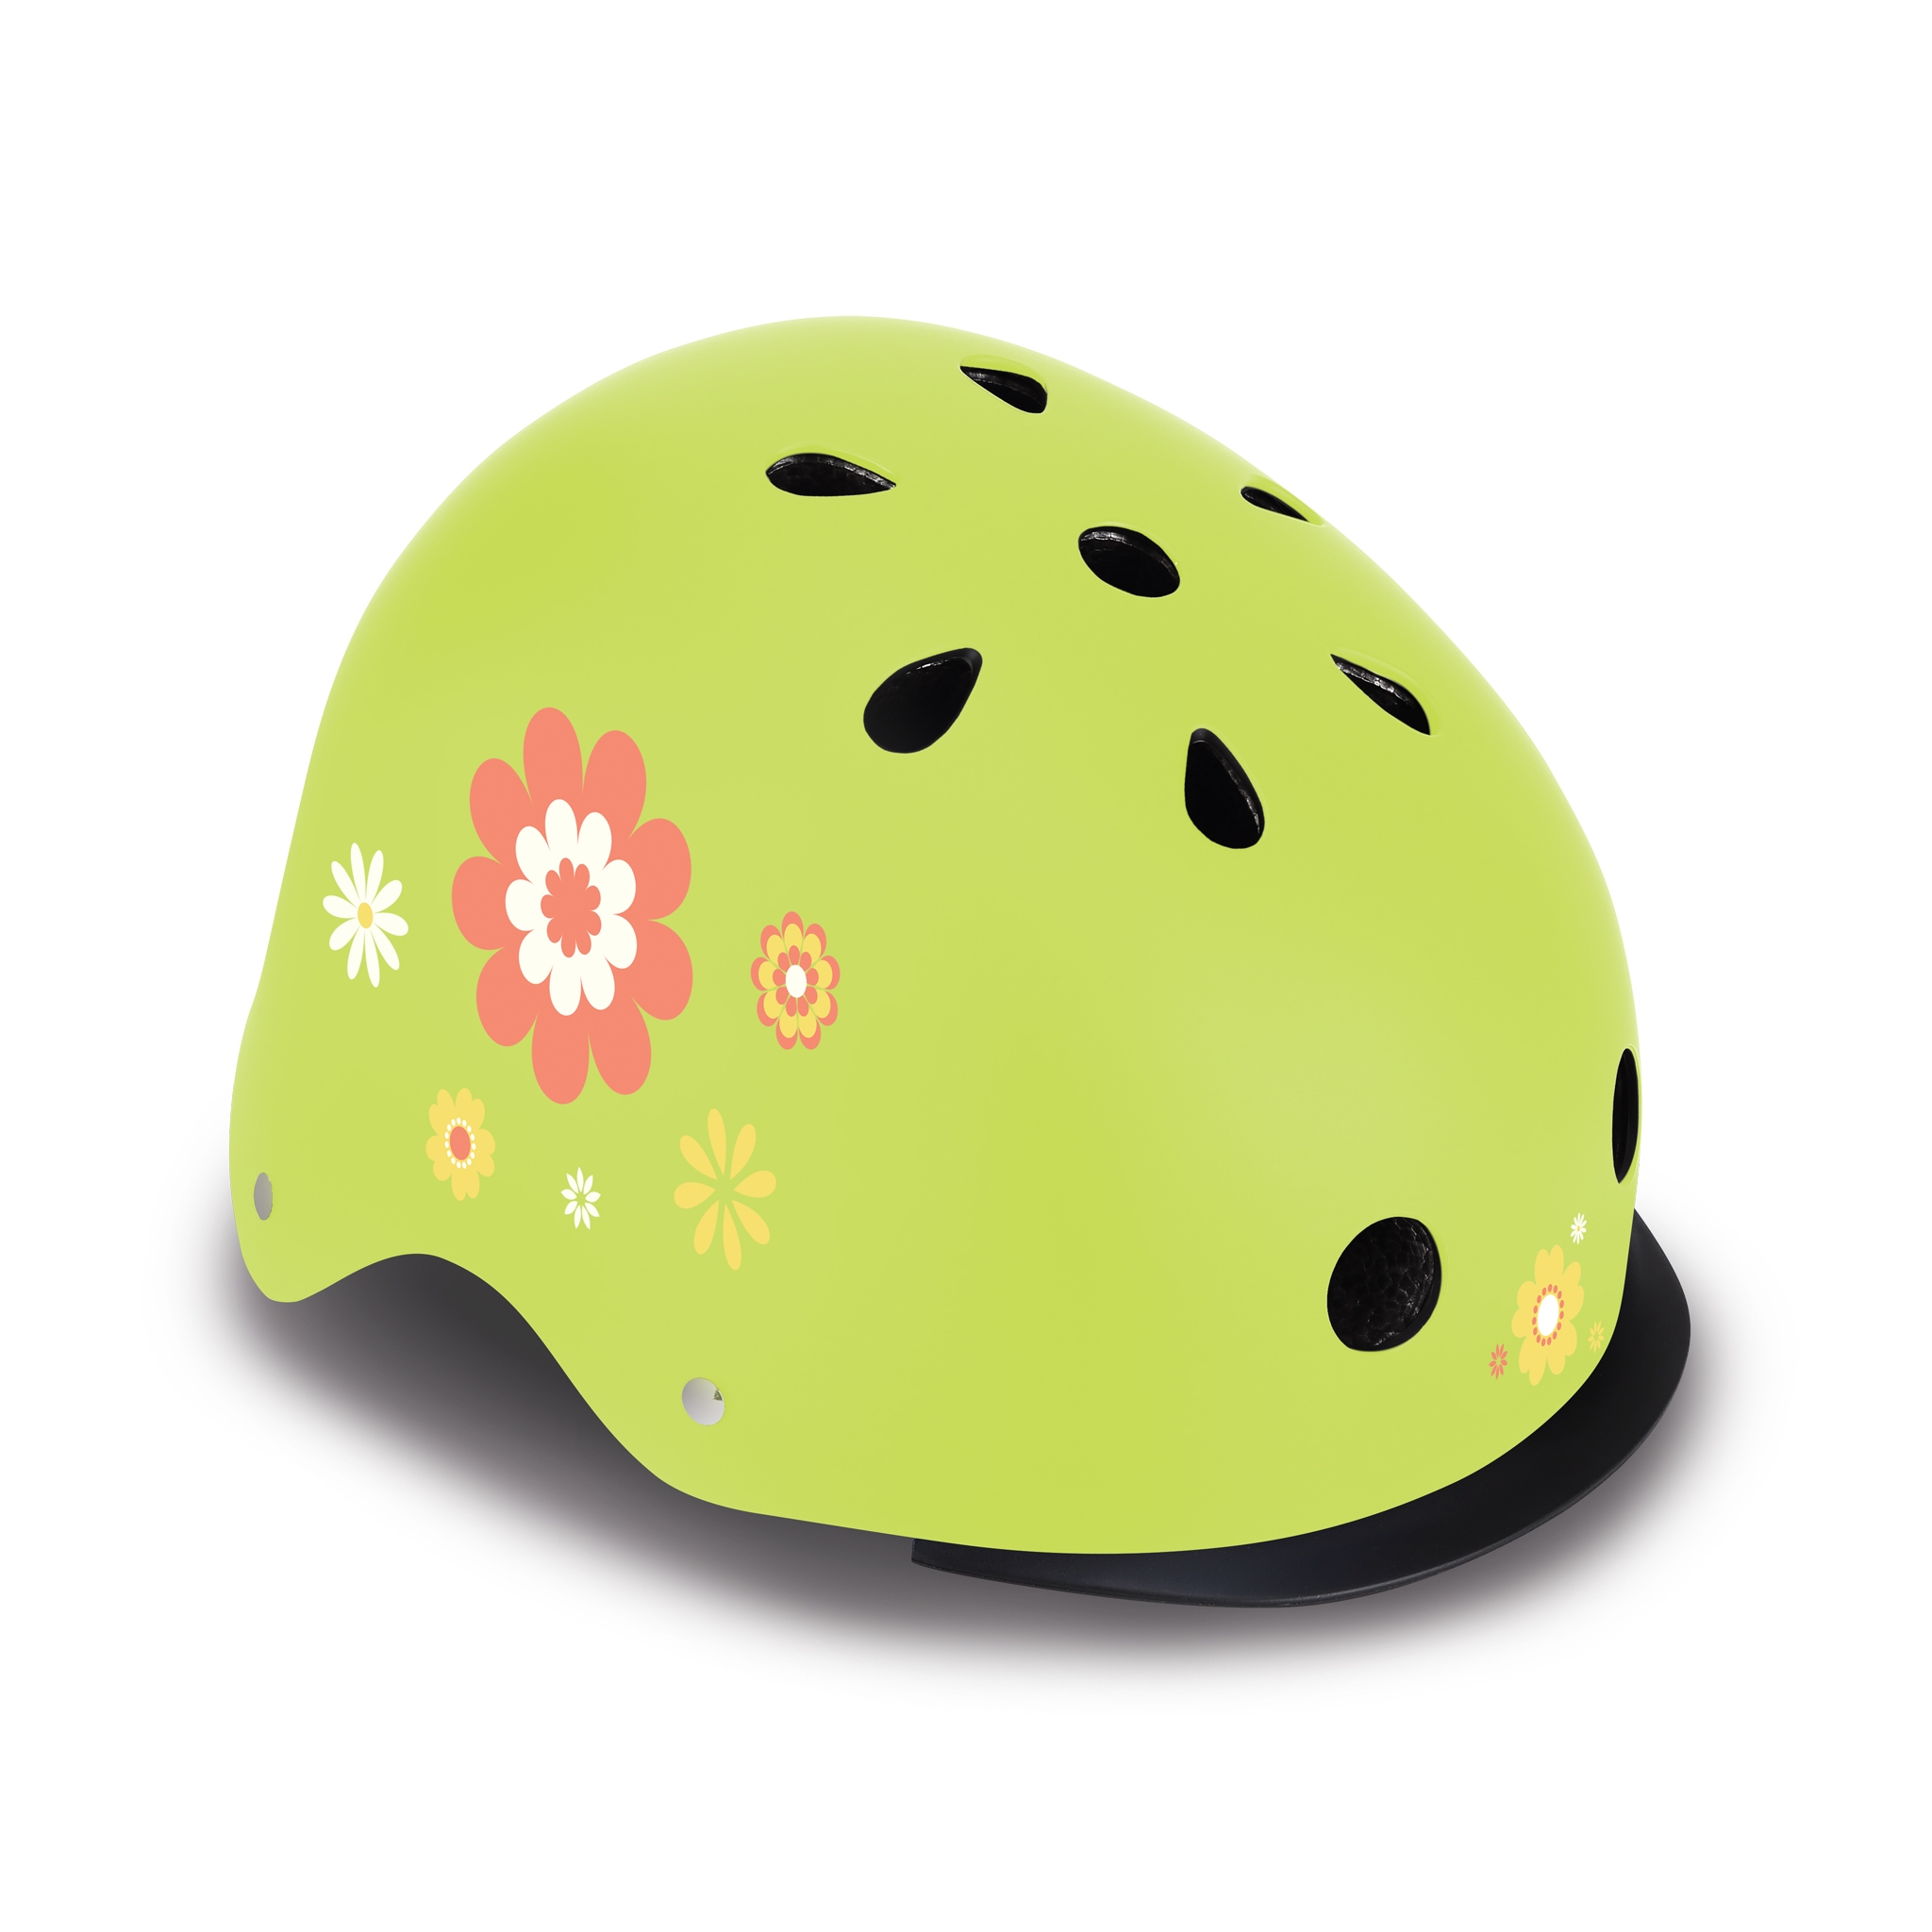 ELITE-helmets-scooter-helmets-for-kids-in-mold-polycarbonate-outer-shell-lime-green 0